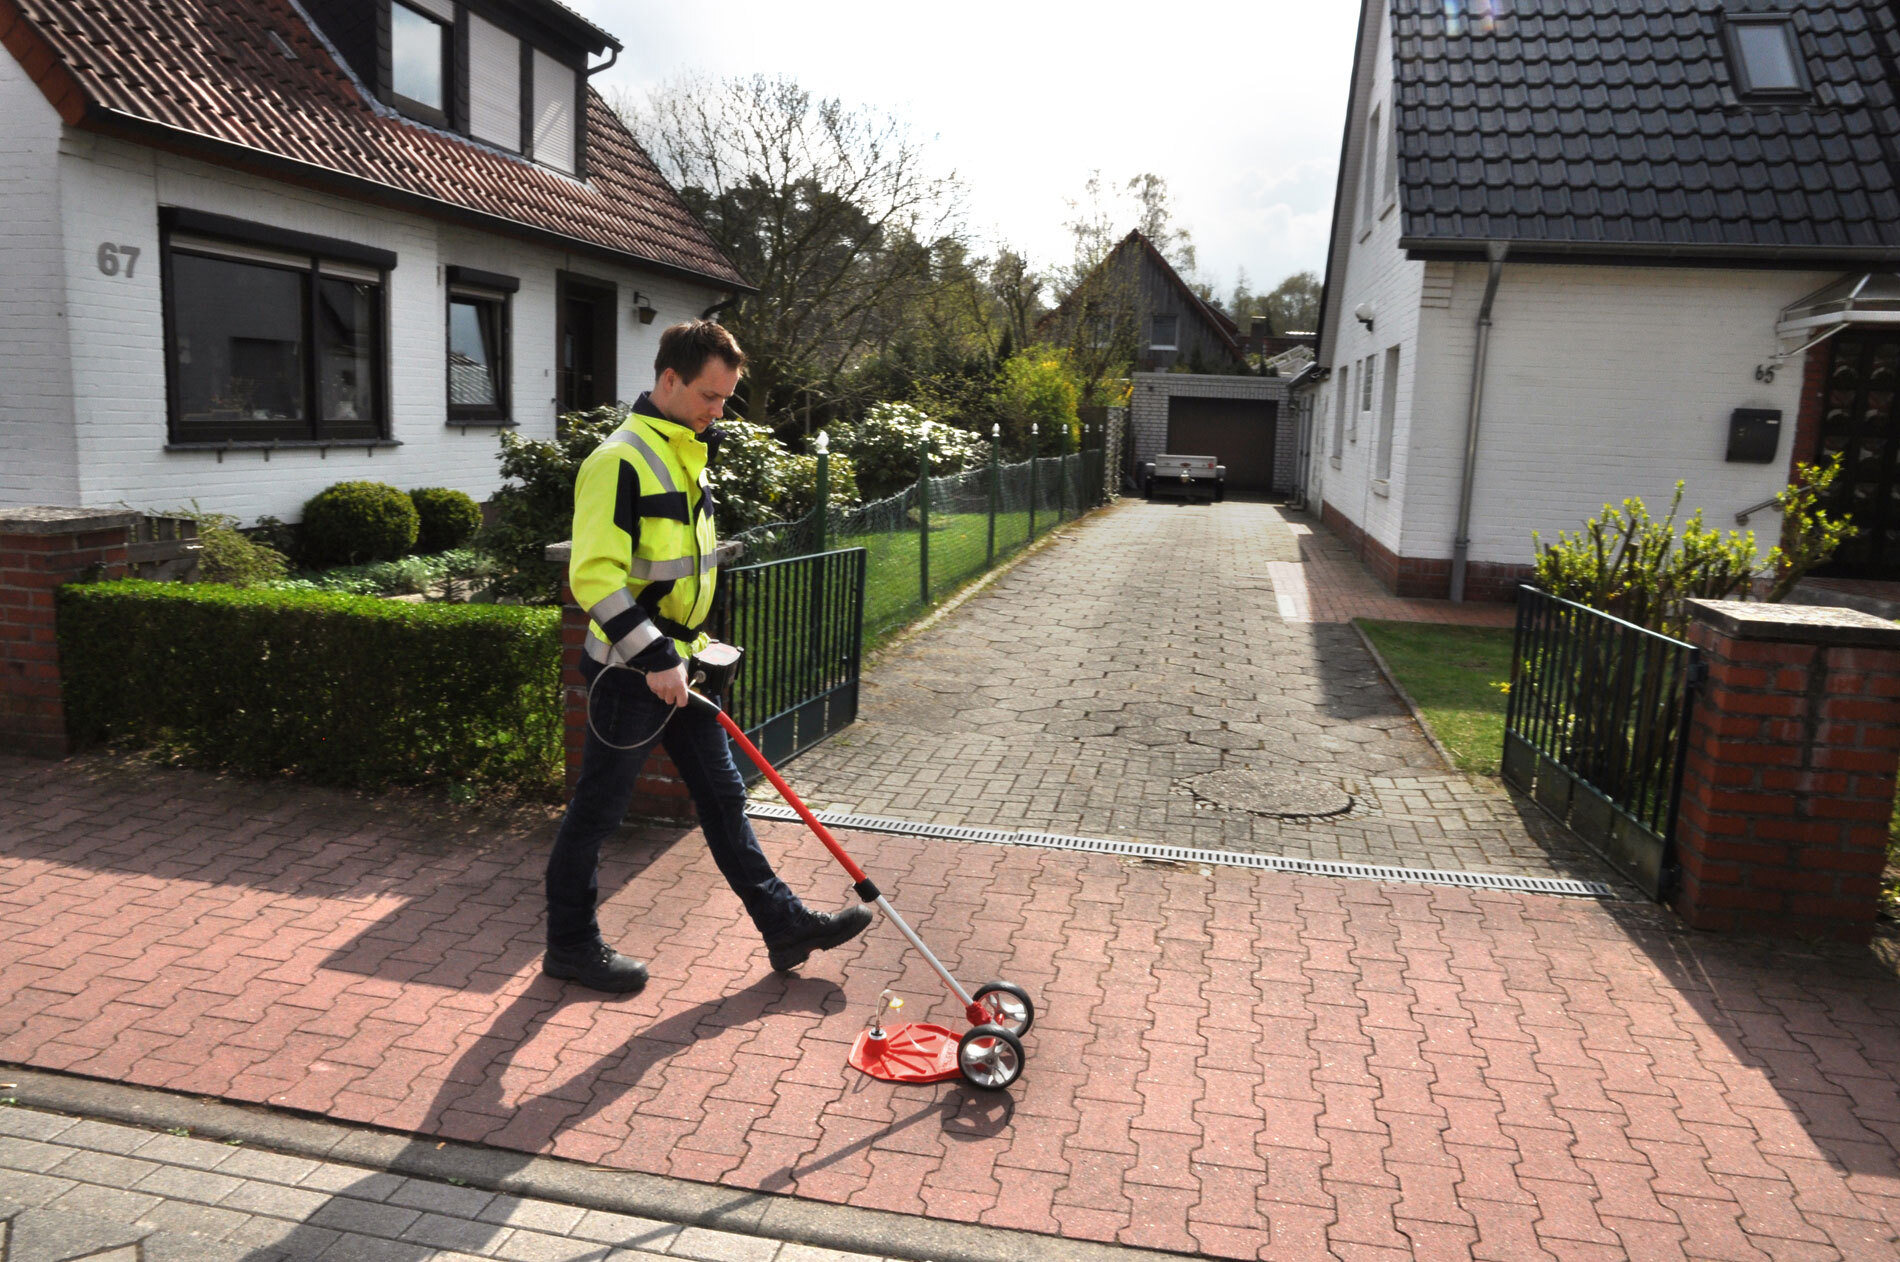 HUNTER detecting gas with carpet probe in Lingen